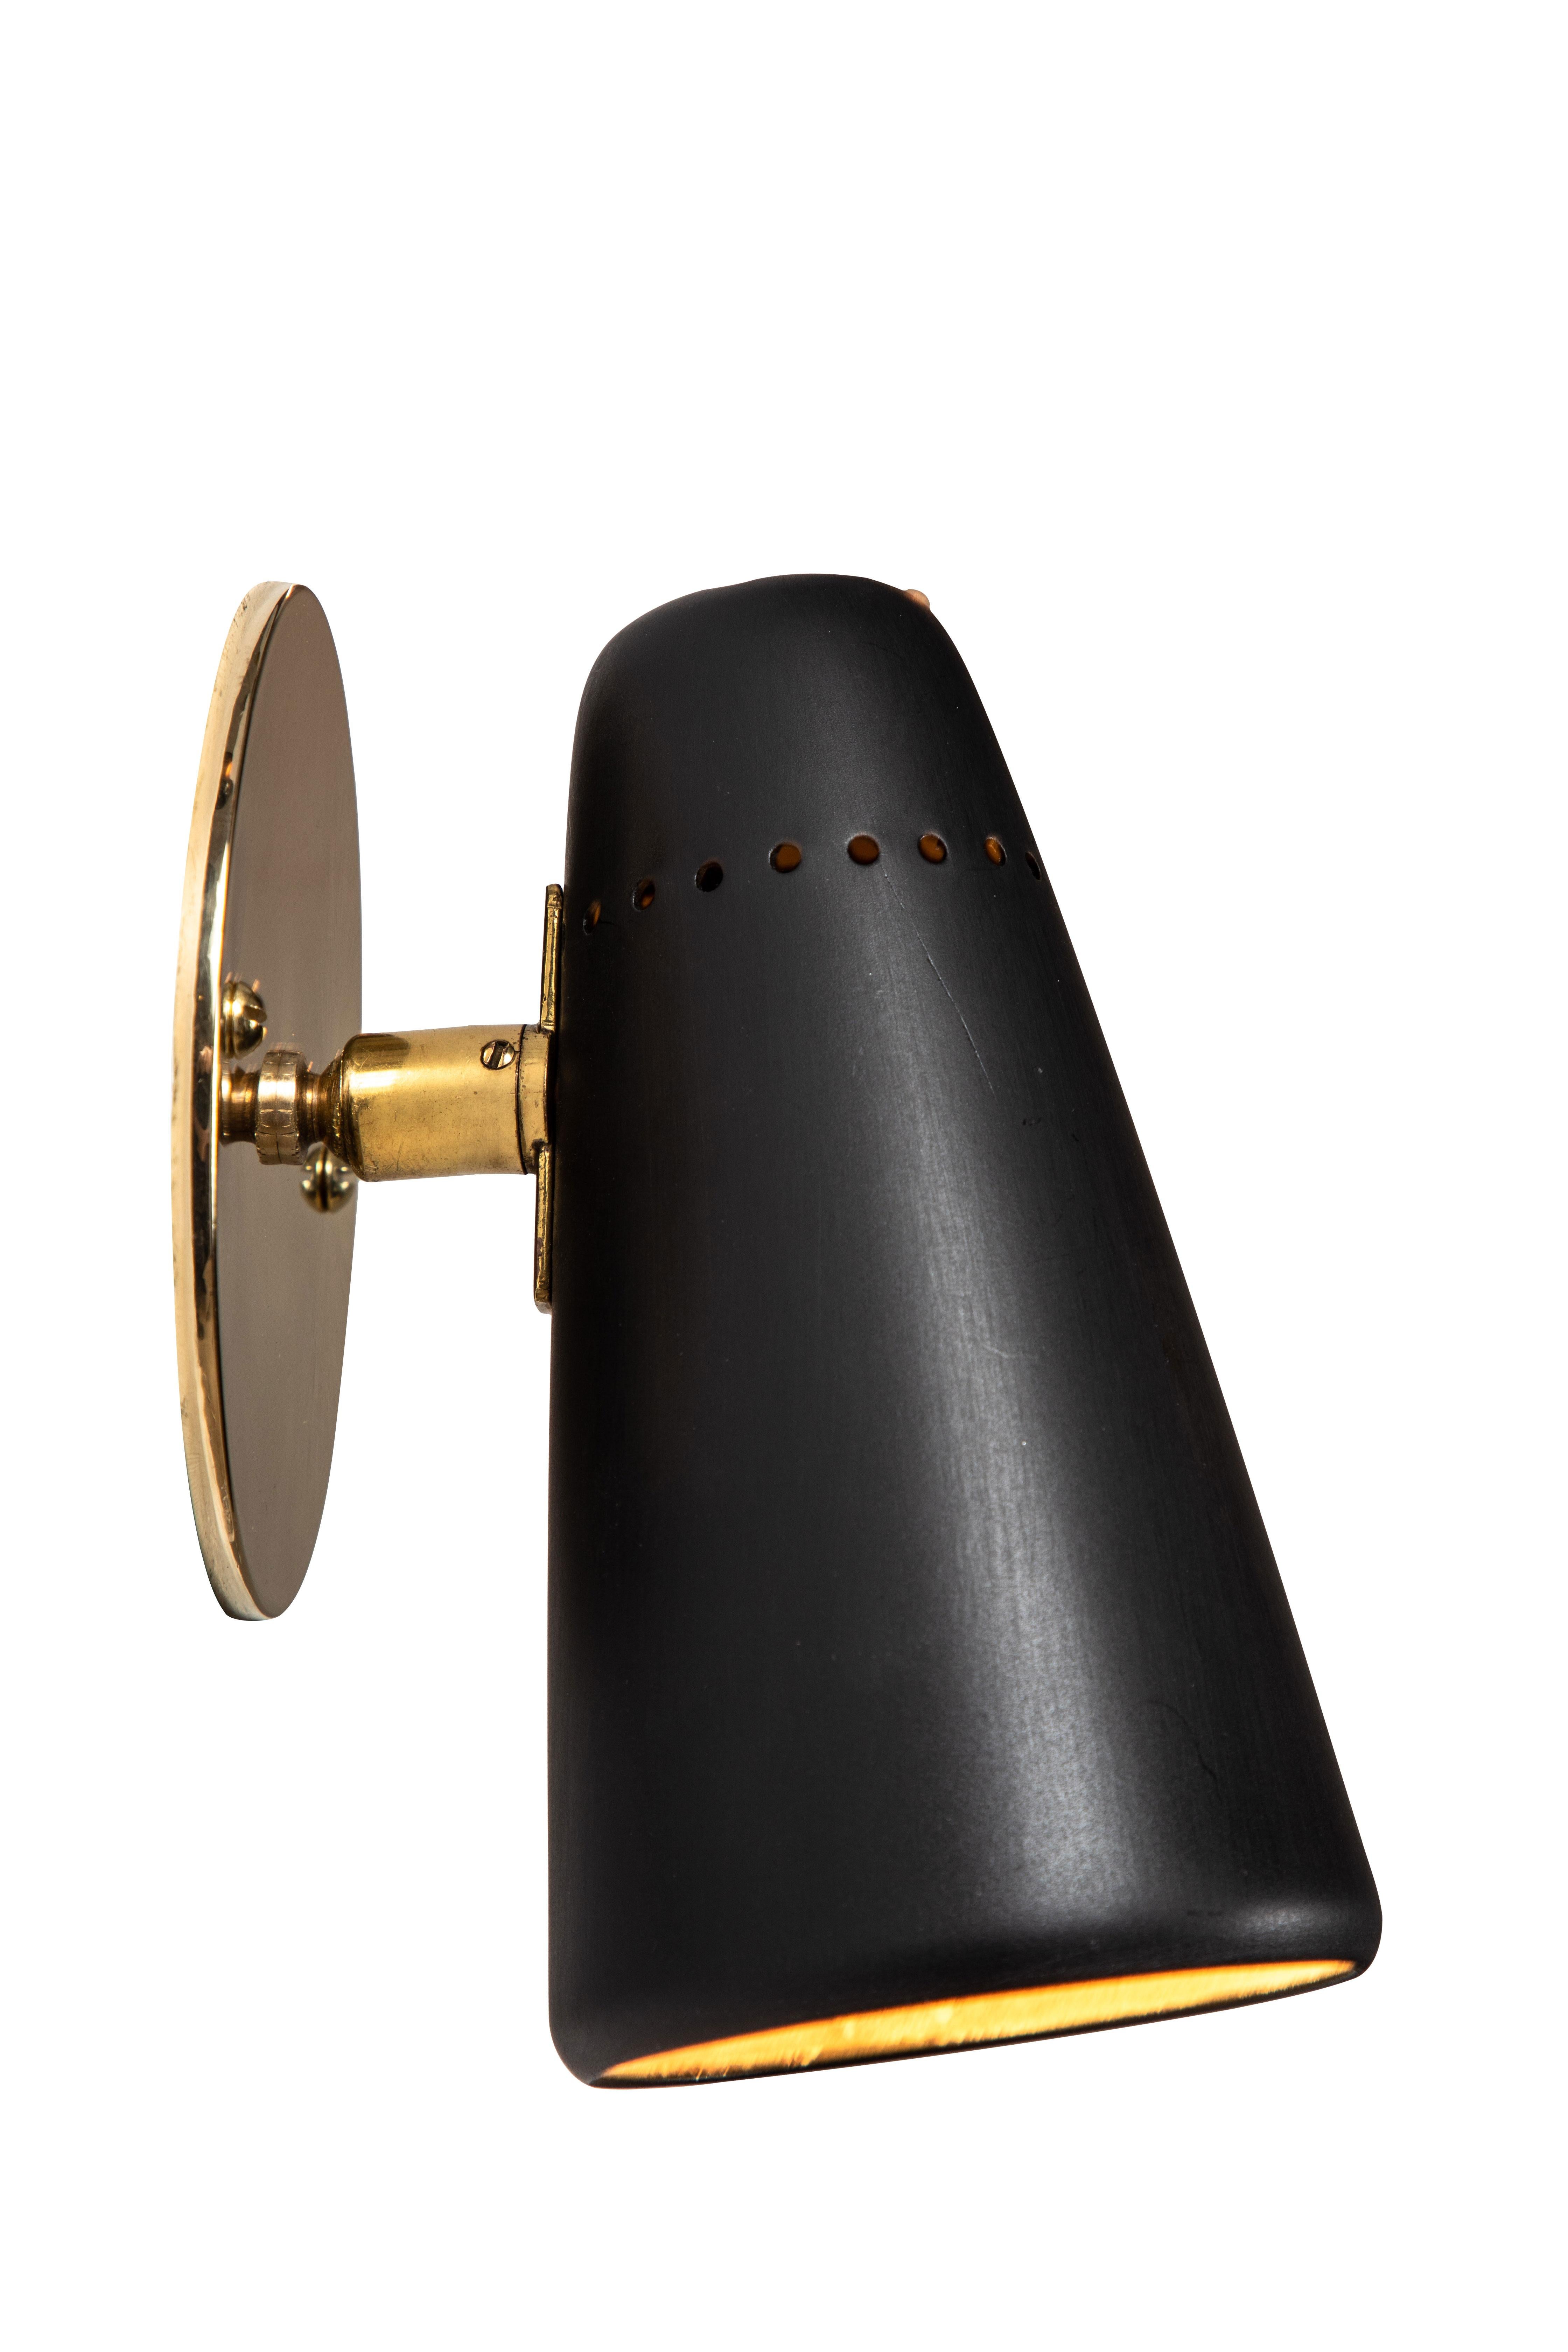 Painted 1950s Stilnovo Sconces in Black and Brass with Yellow Label